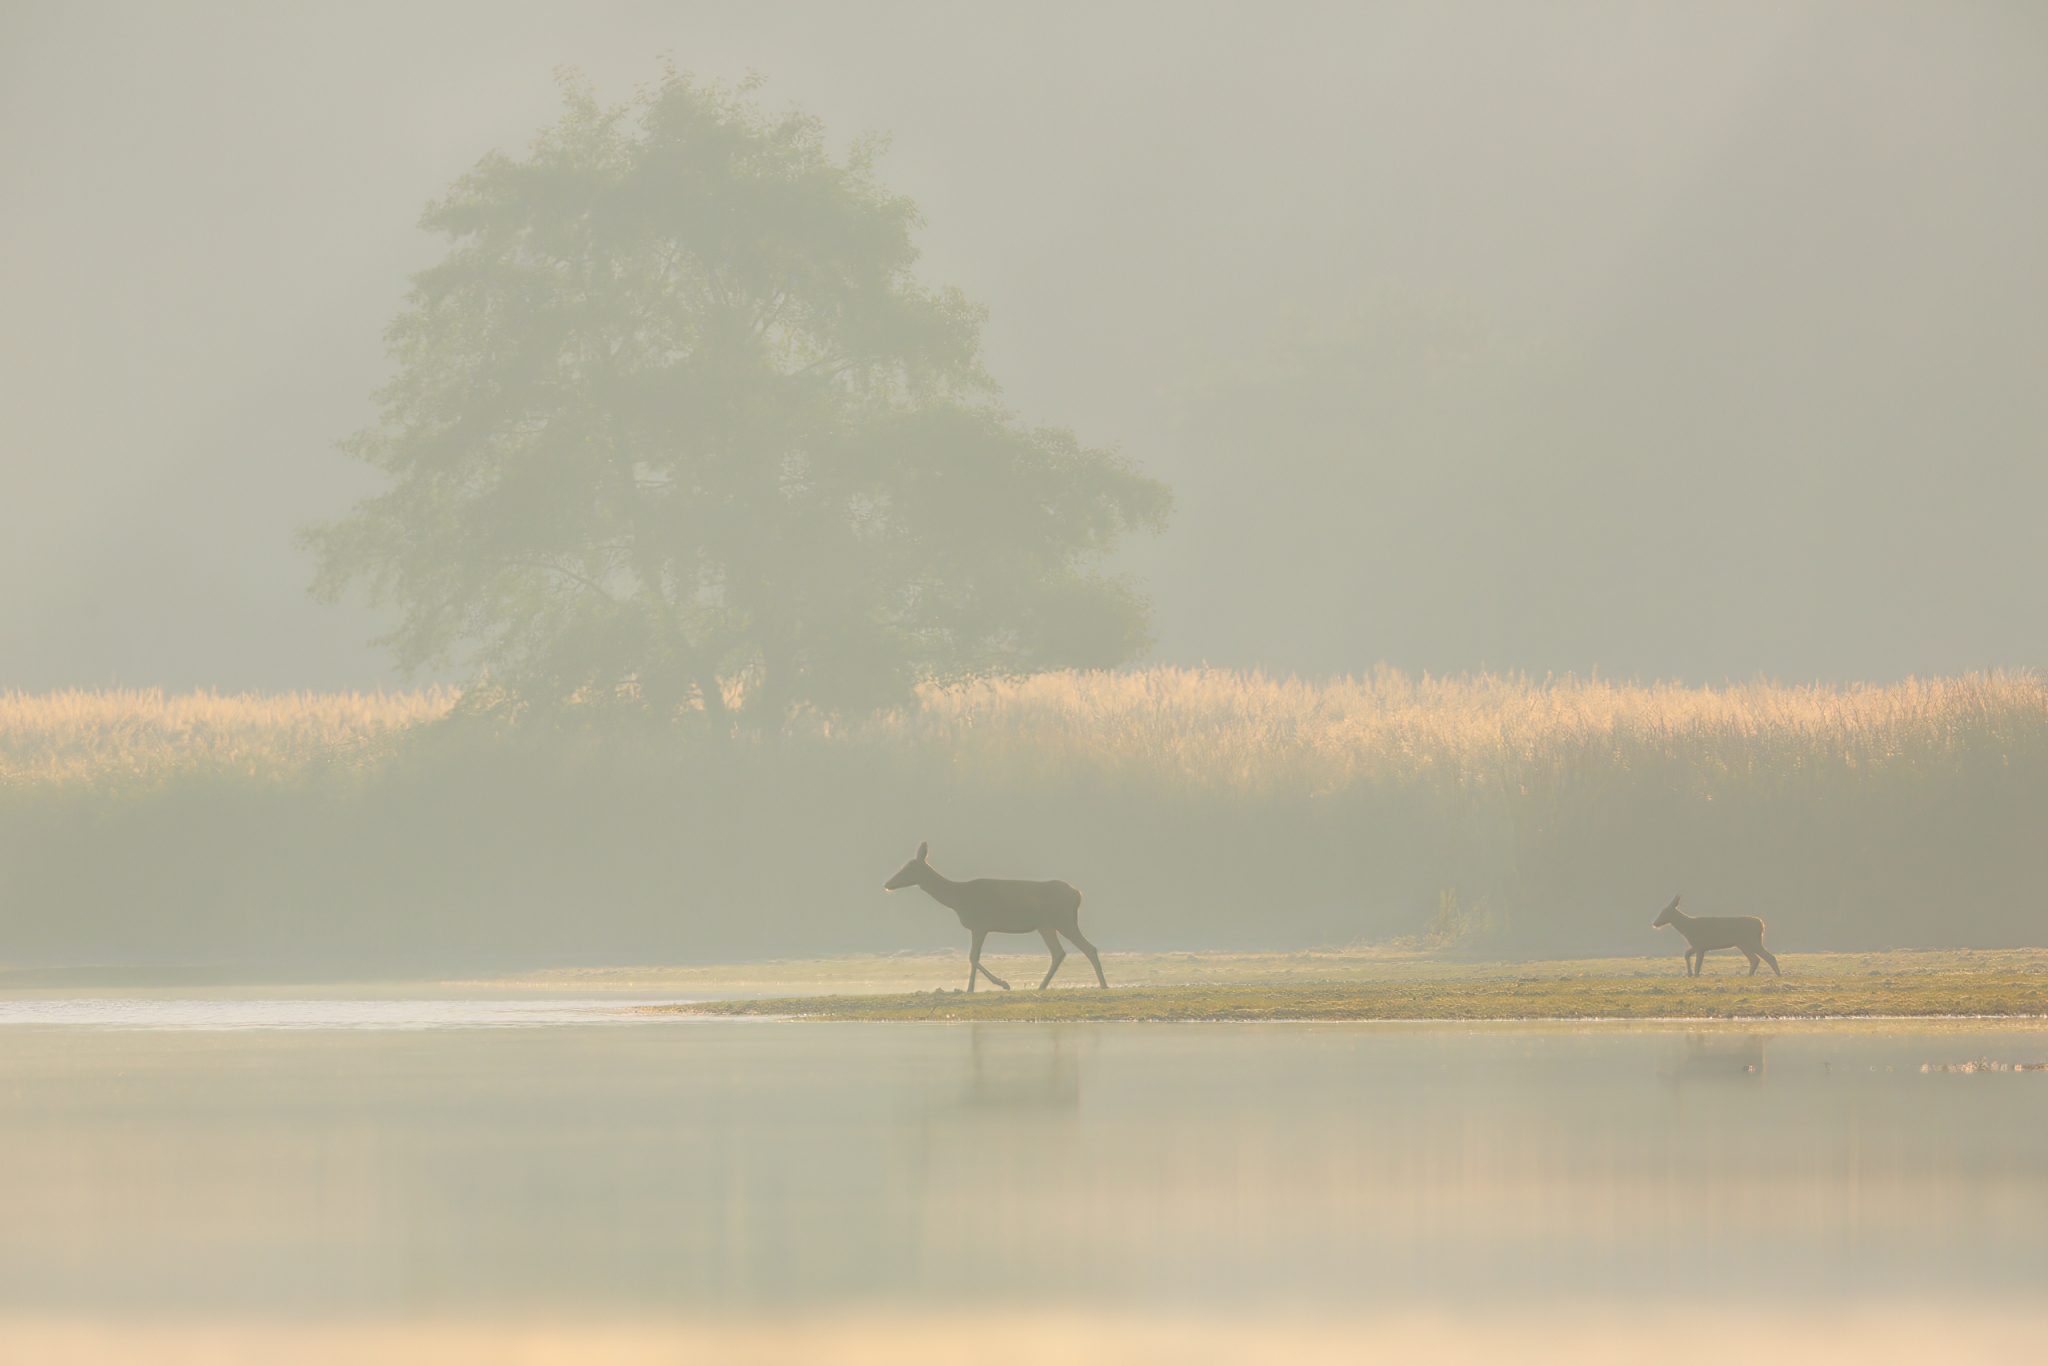 Hind with calf in the foggy dawn.